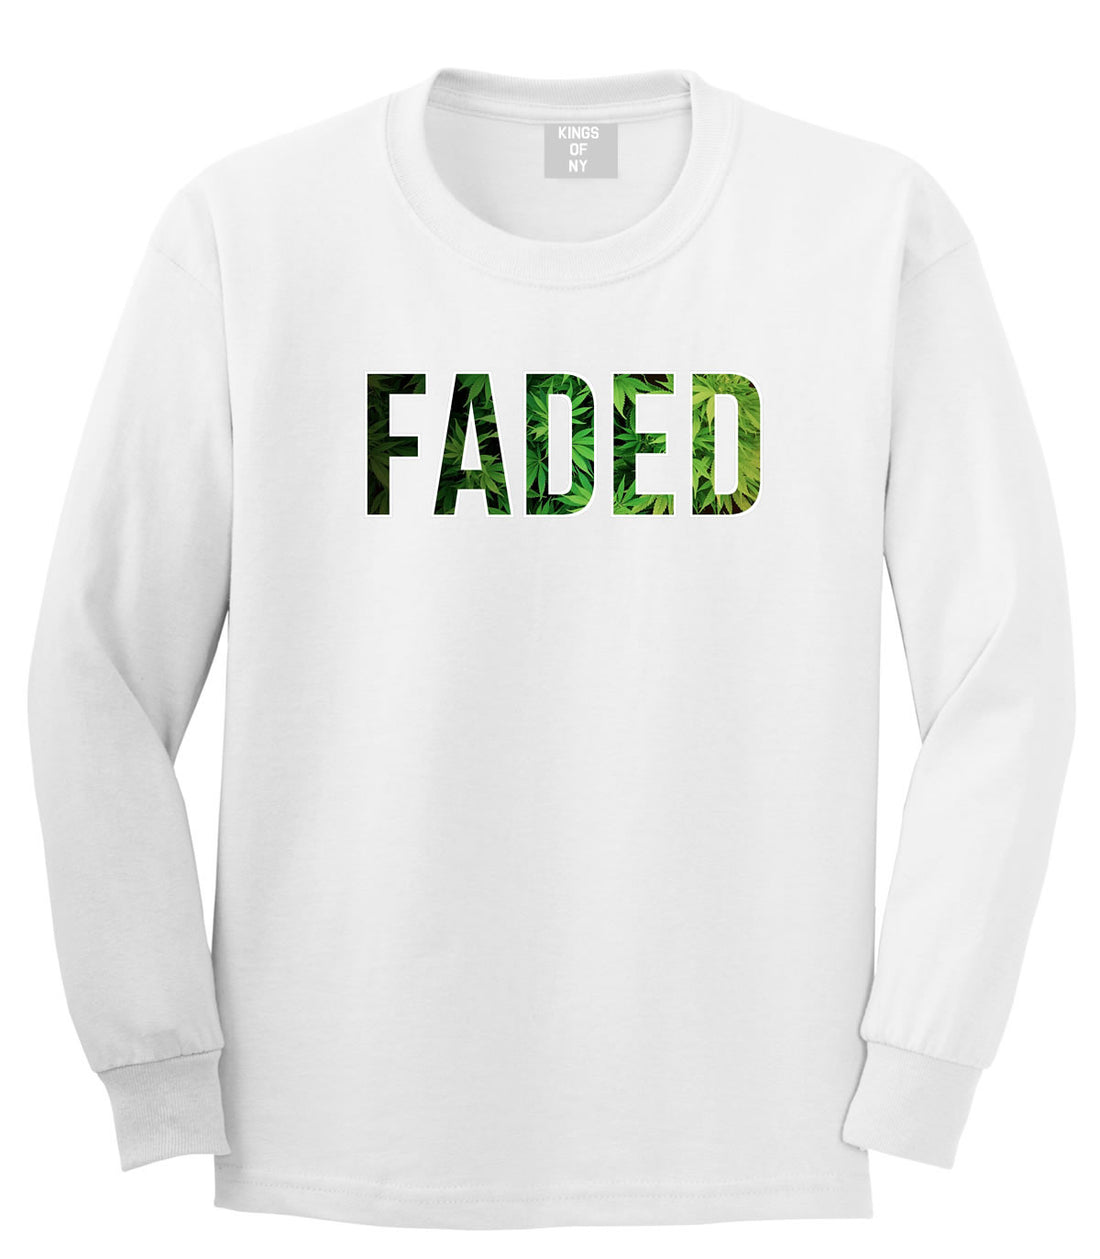 Faded Plant Life Marijuana Drugs Legalize Long Sleeve T-Shirt in White by Kings Of NY